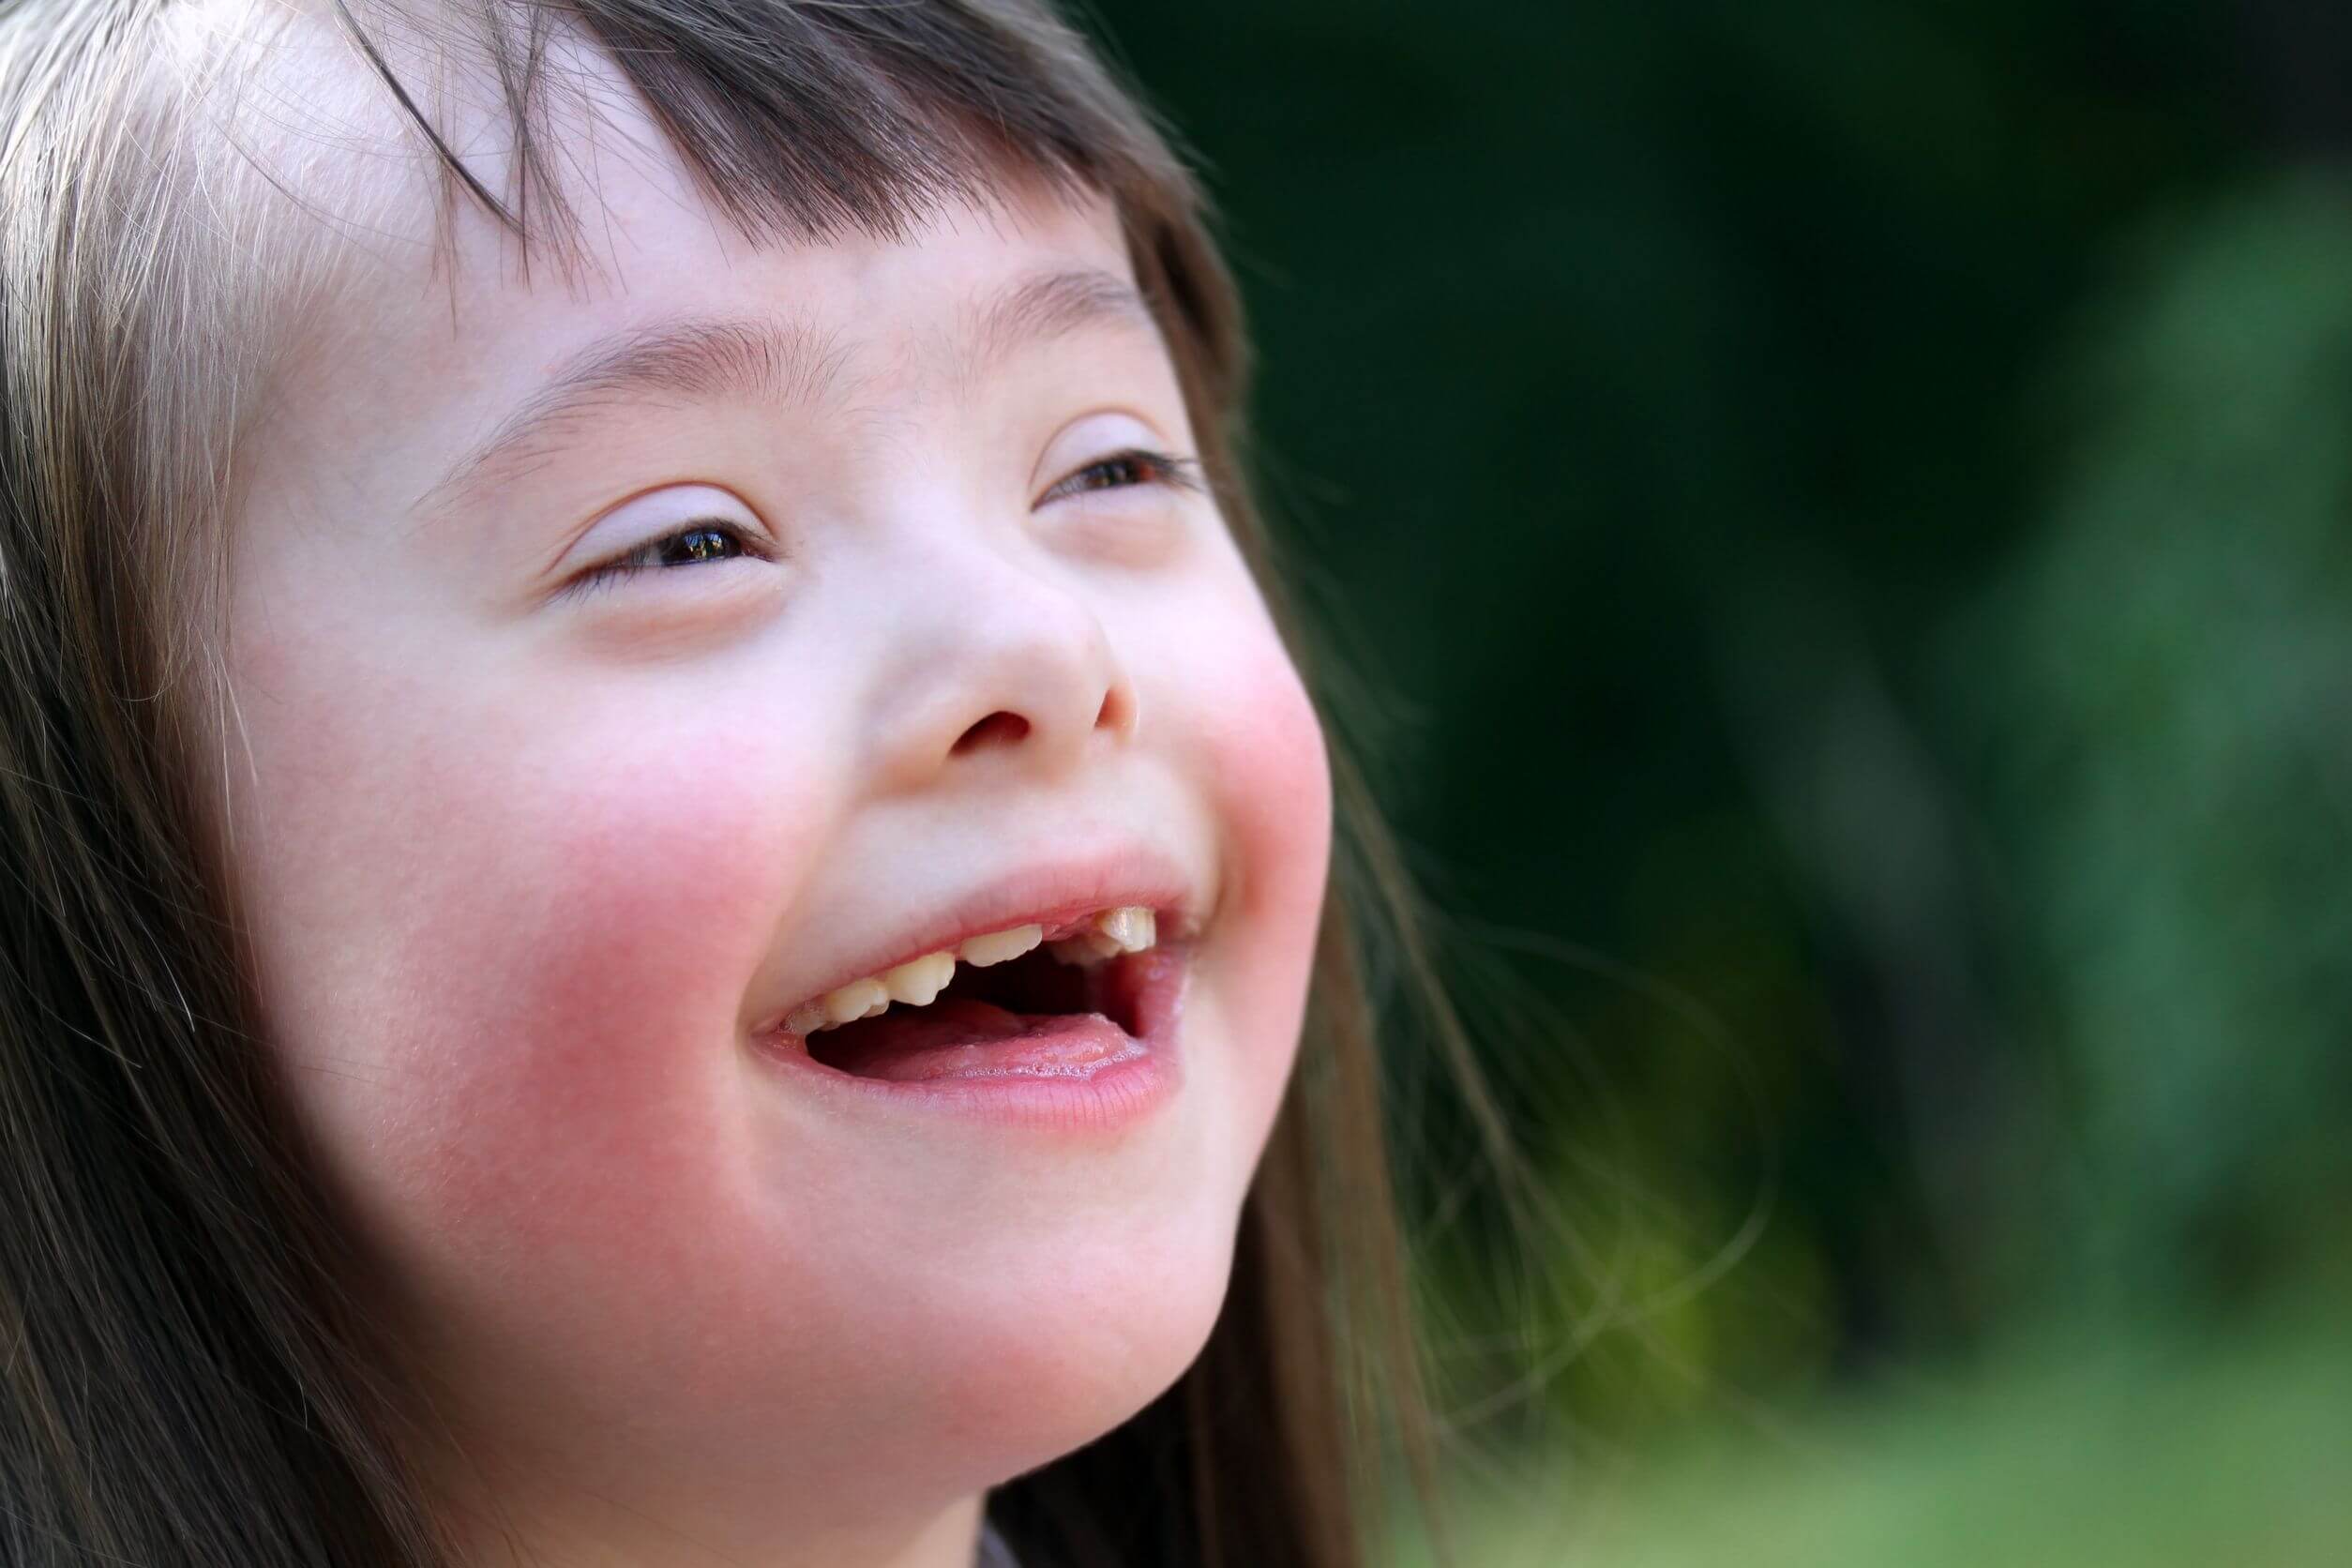 Causes of celiac disease include Down syndrome